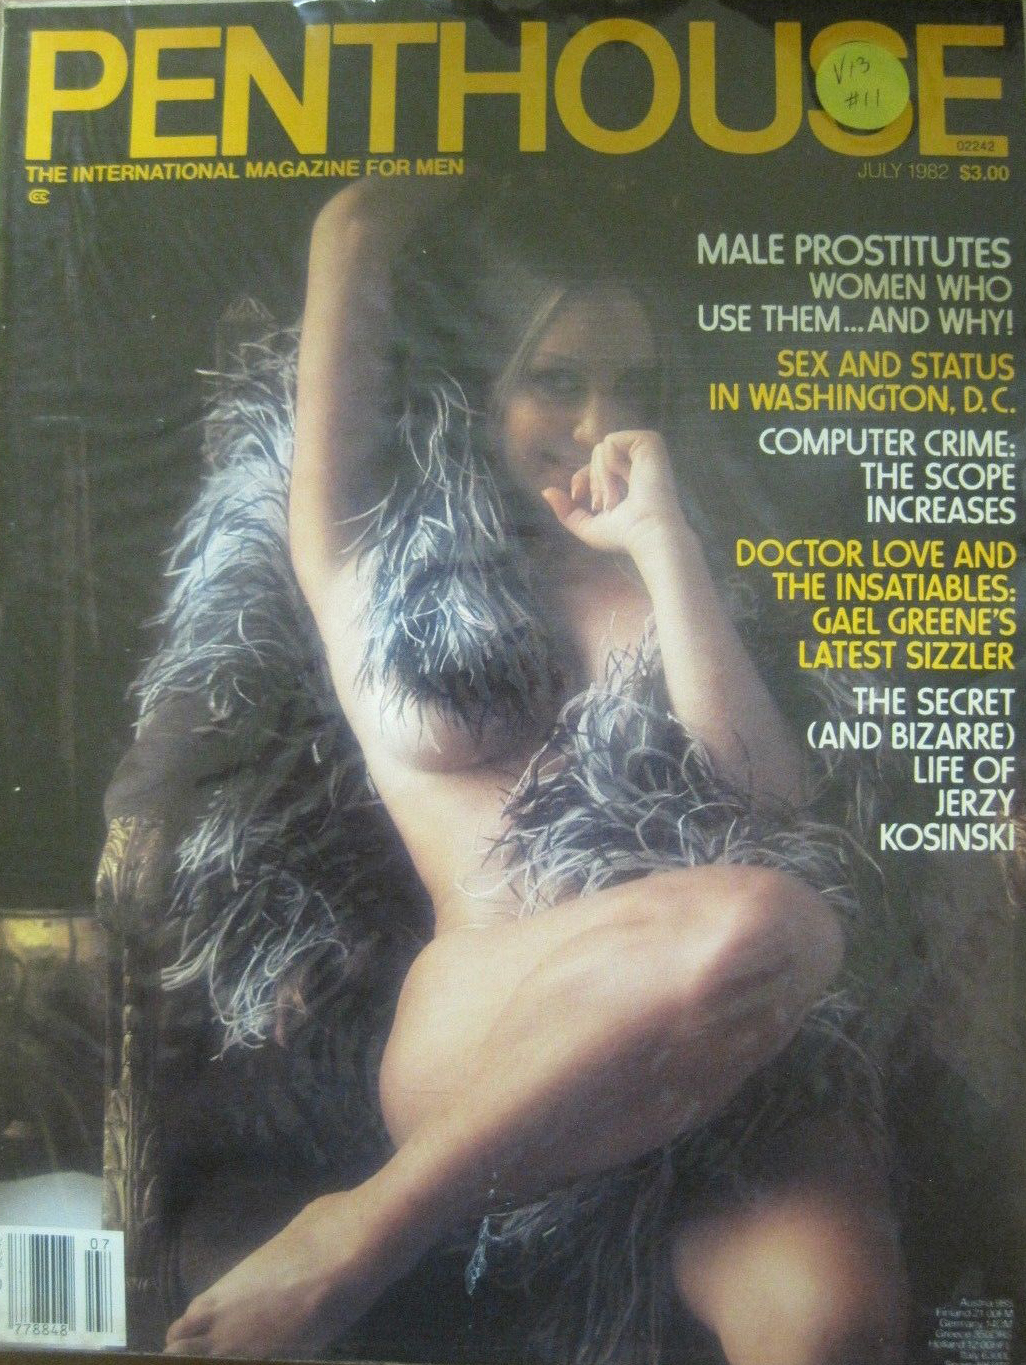 Penthouse UK Vol. 13 # 11 magazine back issue Penthouse UK magizine back copy Penthouse UK Vol. 13 # 11 Magazine Back Issue Published by Penthouse Publishing, Bob Guccione. Male Prostitutes Women Who Use Them...And Why!.